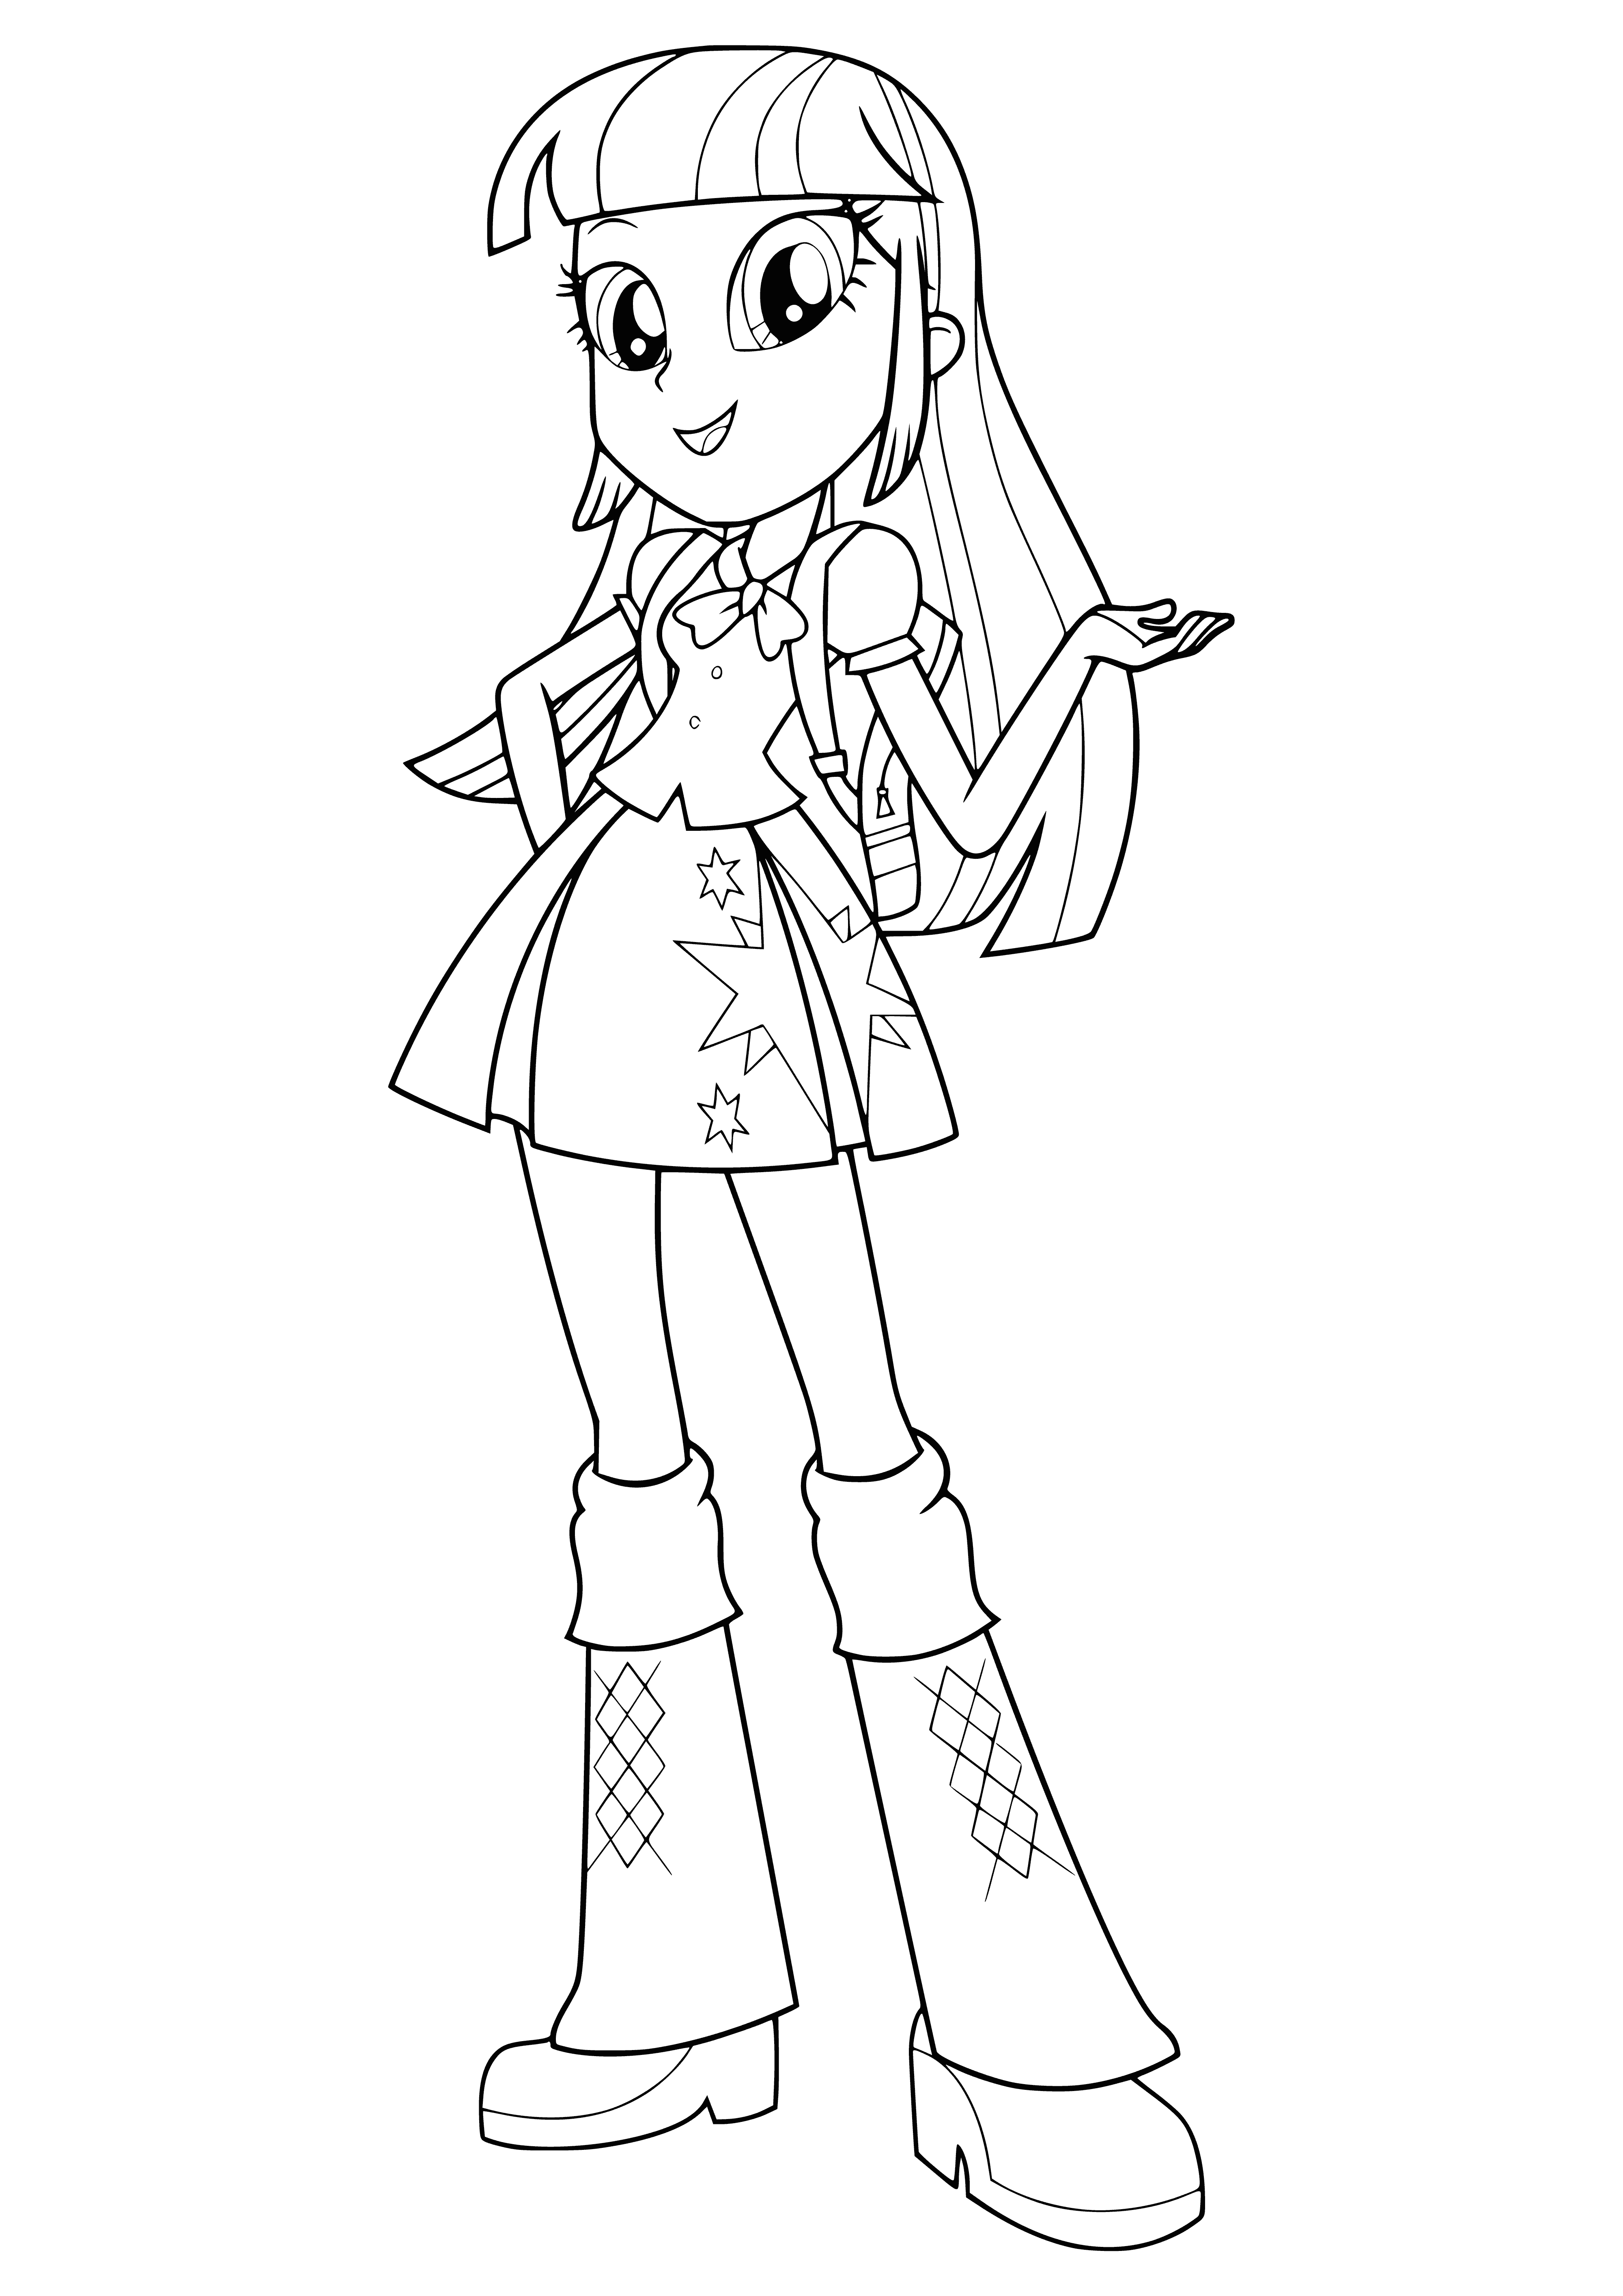 Girl with long, sparkly purple hair and pink headband stands in front of bookshelf. Wearing a pink tank, purple and white striped skirt, and sneakers with purple and white socks and bracelet. #coloringpage